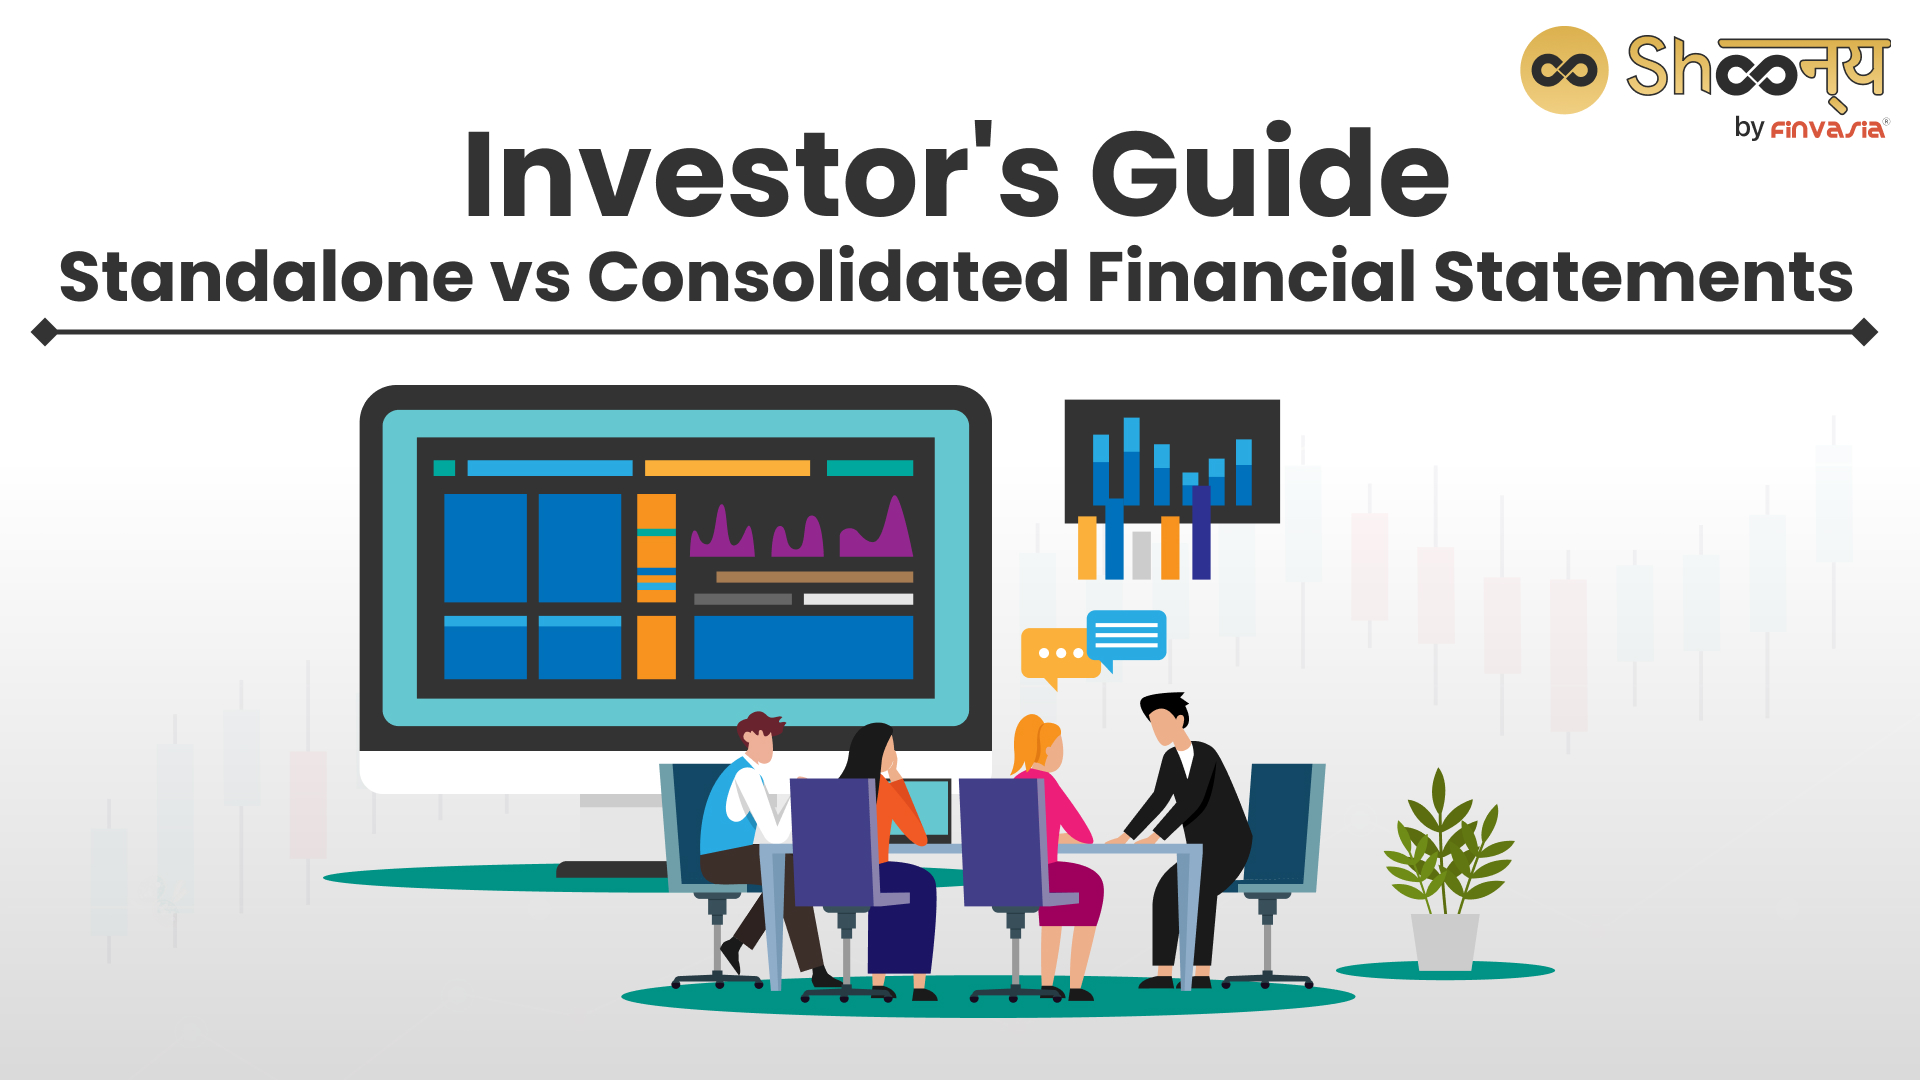 Standalone vs Consolidated Financial Statements: How Do They Differ?